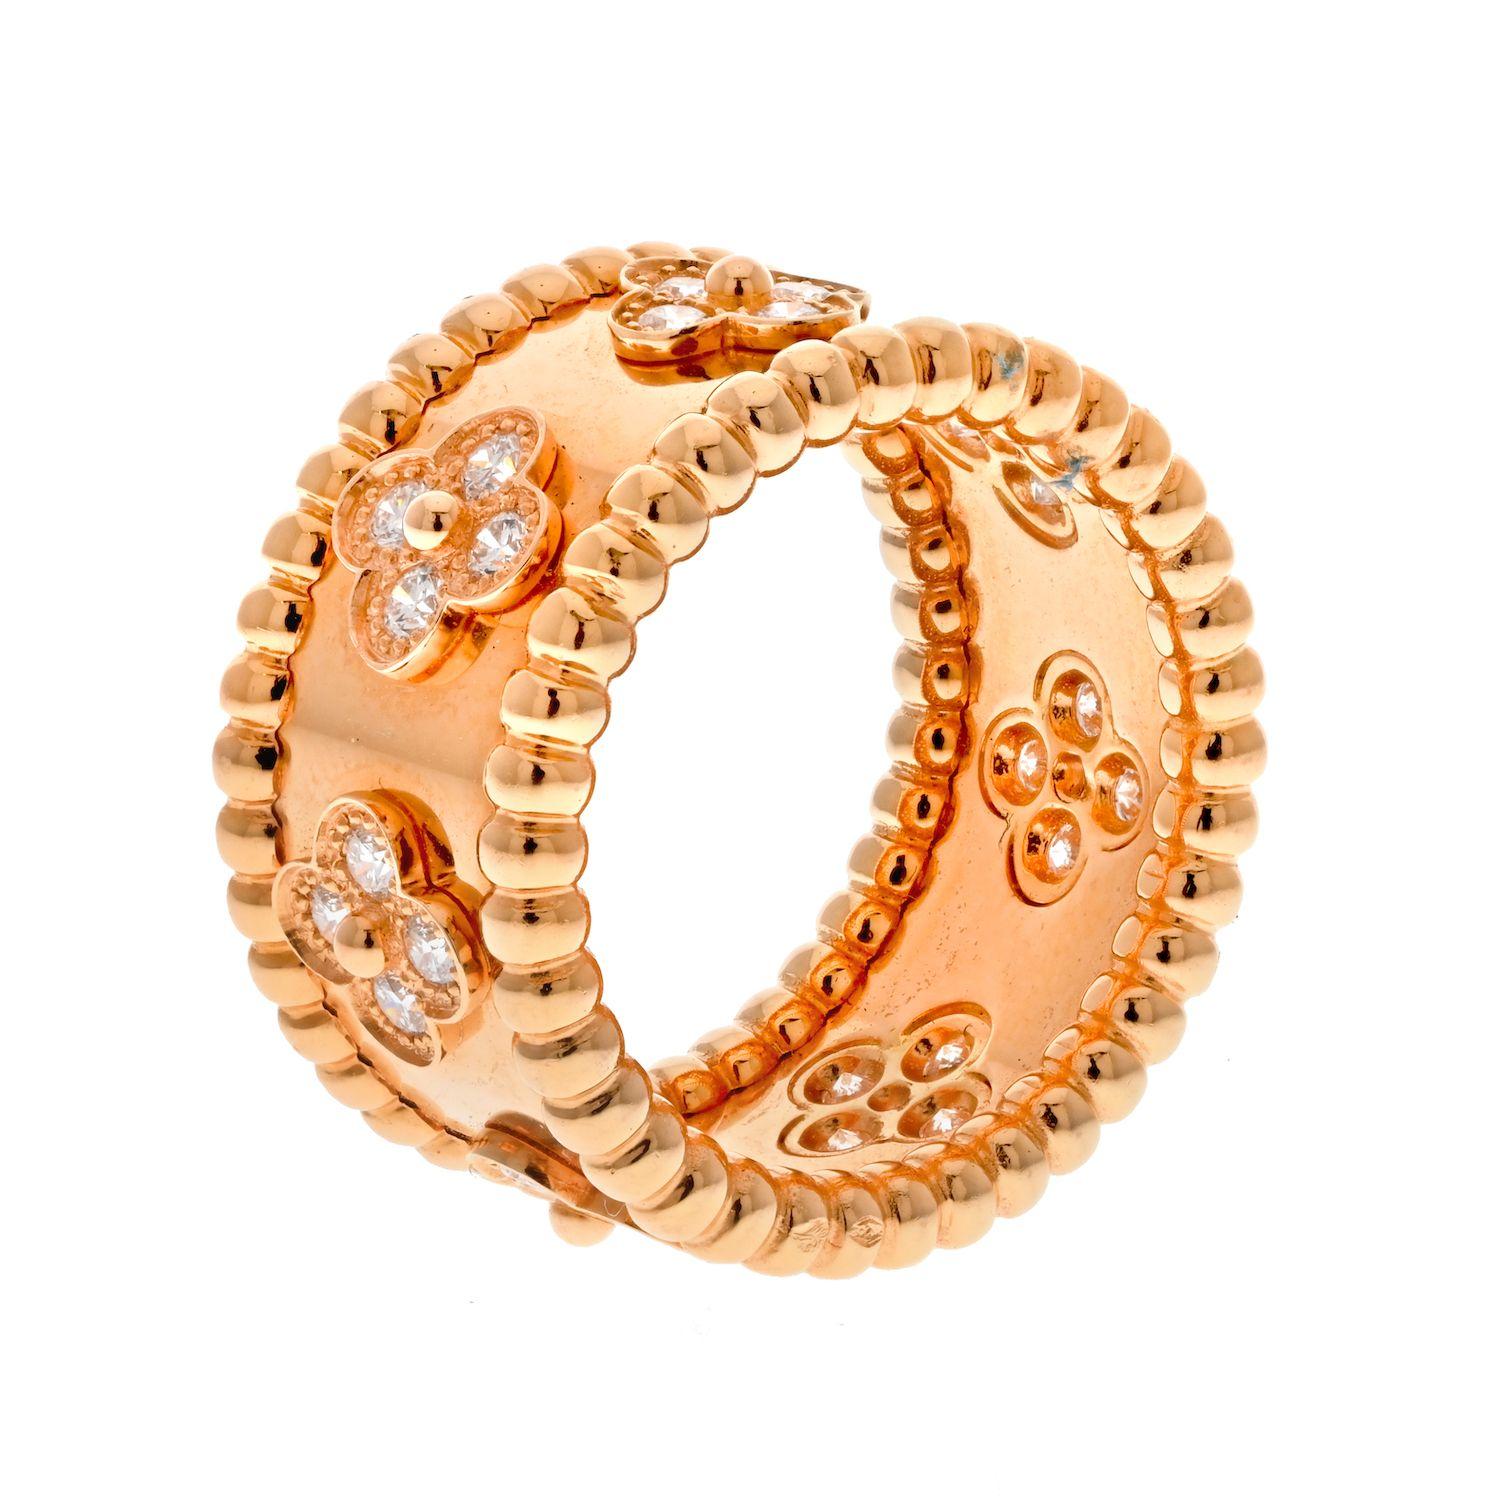 The Perlee ring from Van Cleef & Arpels is a timeless piece of jewelry. Crafted from 18k yellow gold and set with dazzling diamonds, this ring is sure to make a statement. With its classic design, it is sure to be a treasured piece of jewelry for